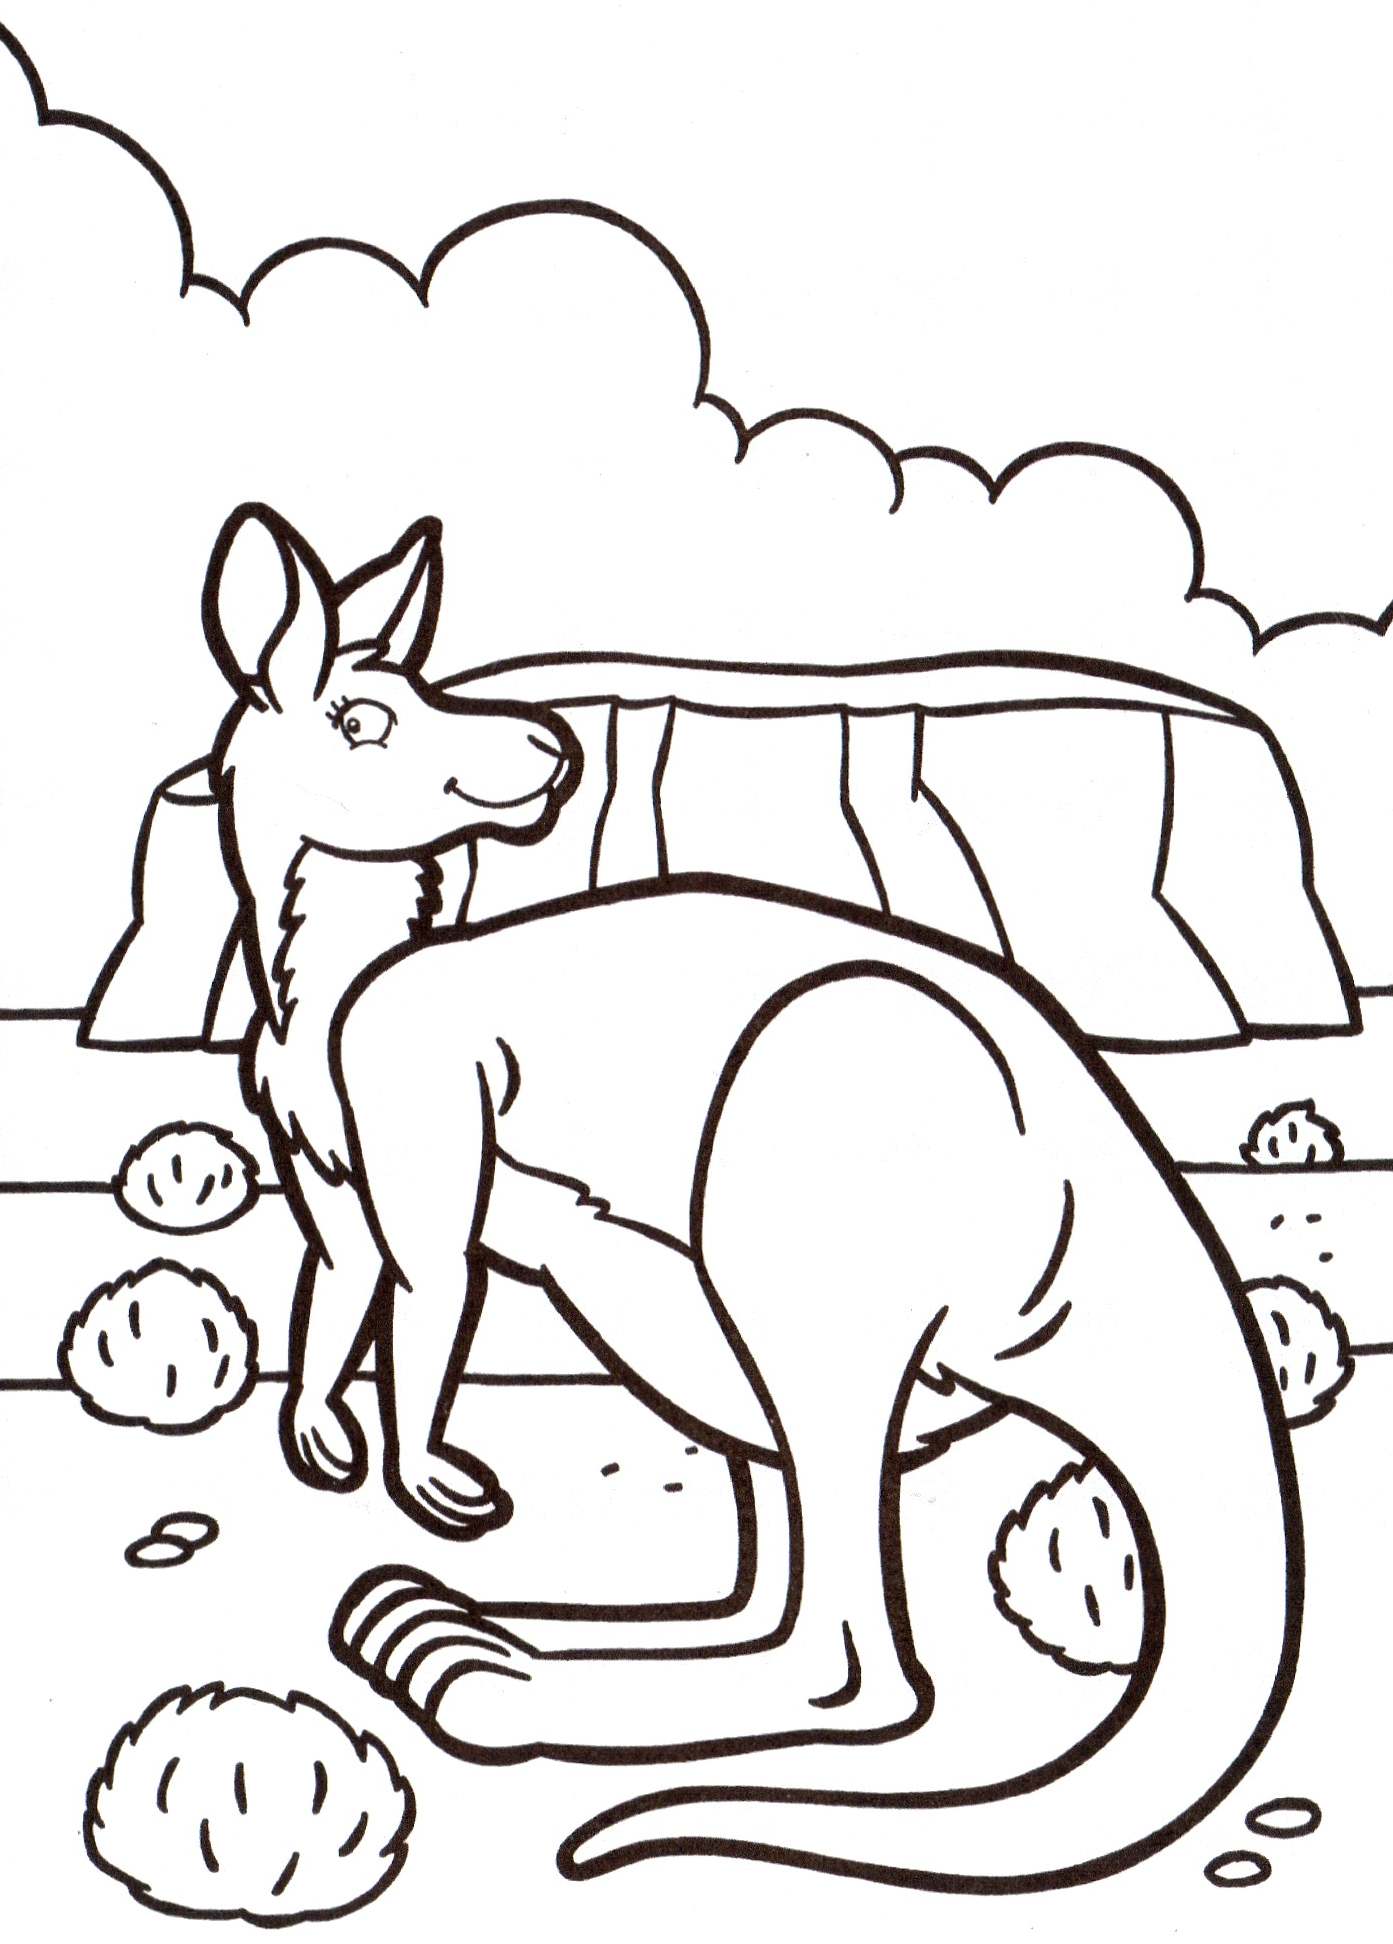 Kangaroo in australia   Animals Adult Coloring Pages